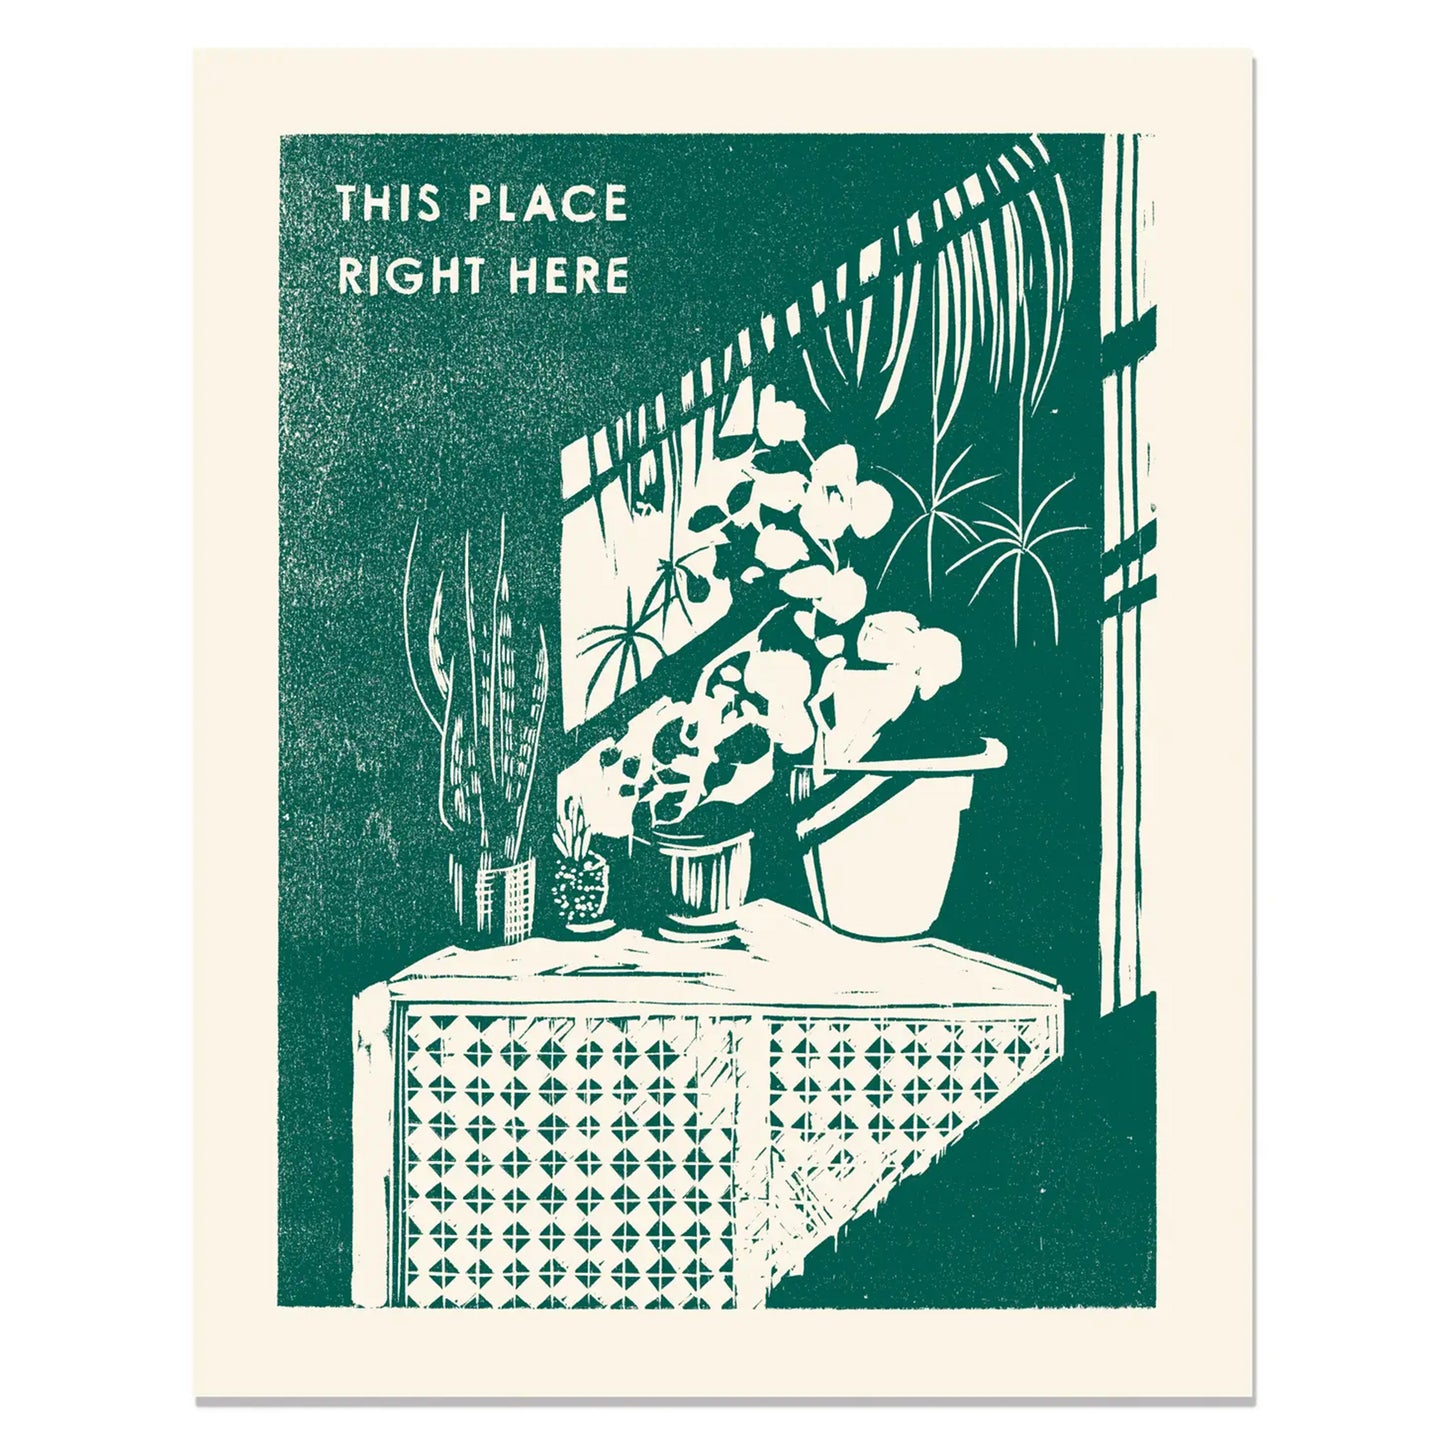 Heartell Press: This Place Right Here Art Print